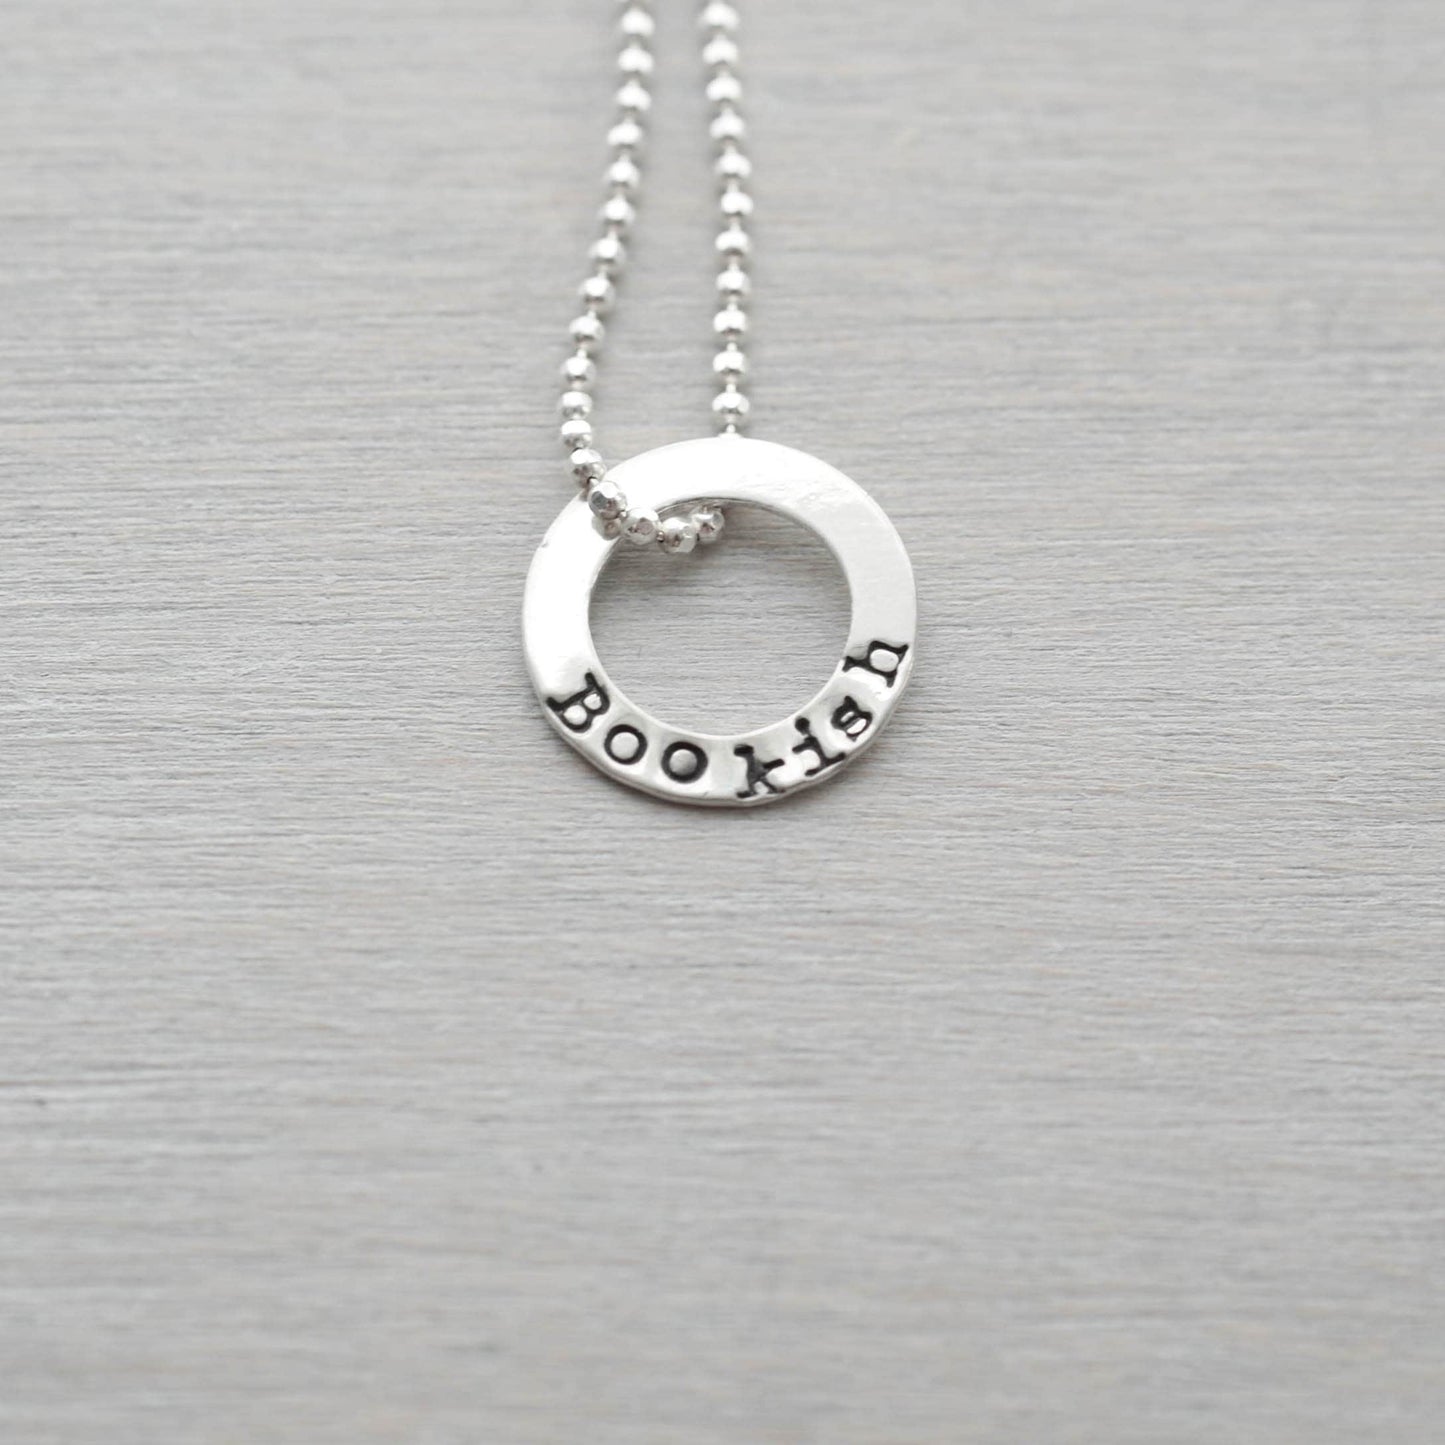 Book Lover Necklace Bookish gifts Bookworm gift